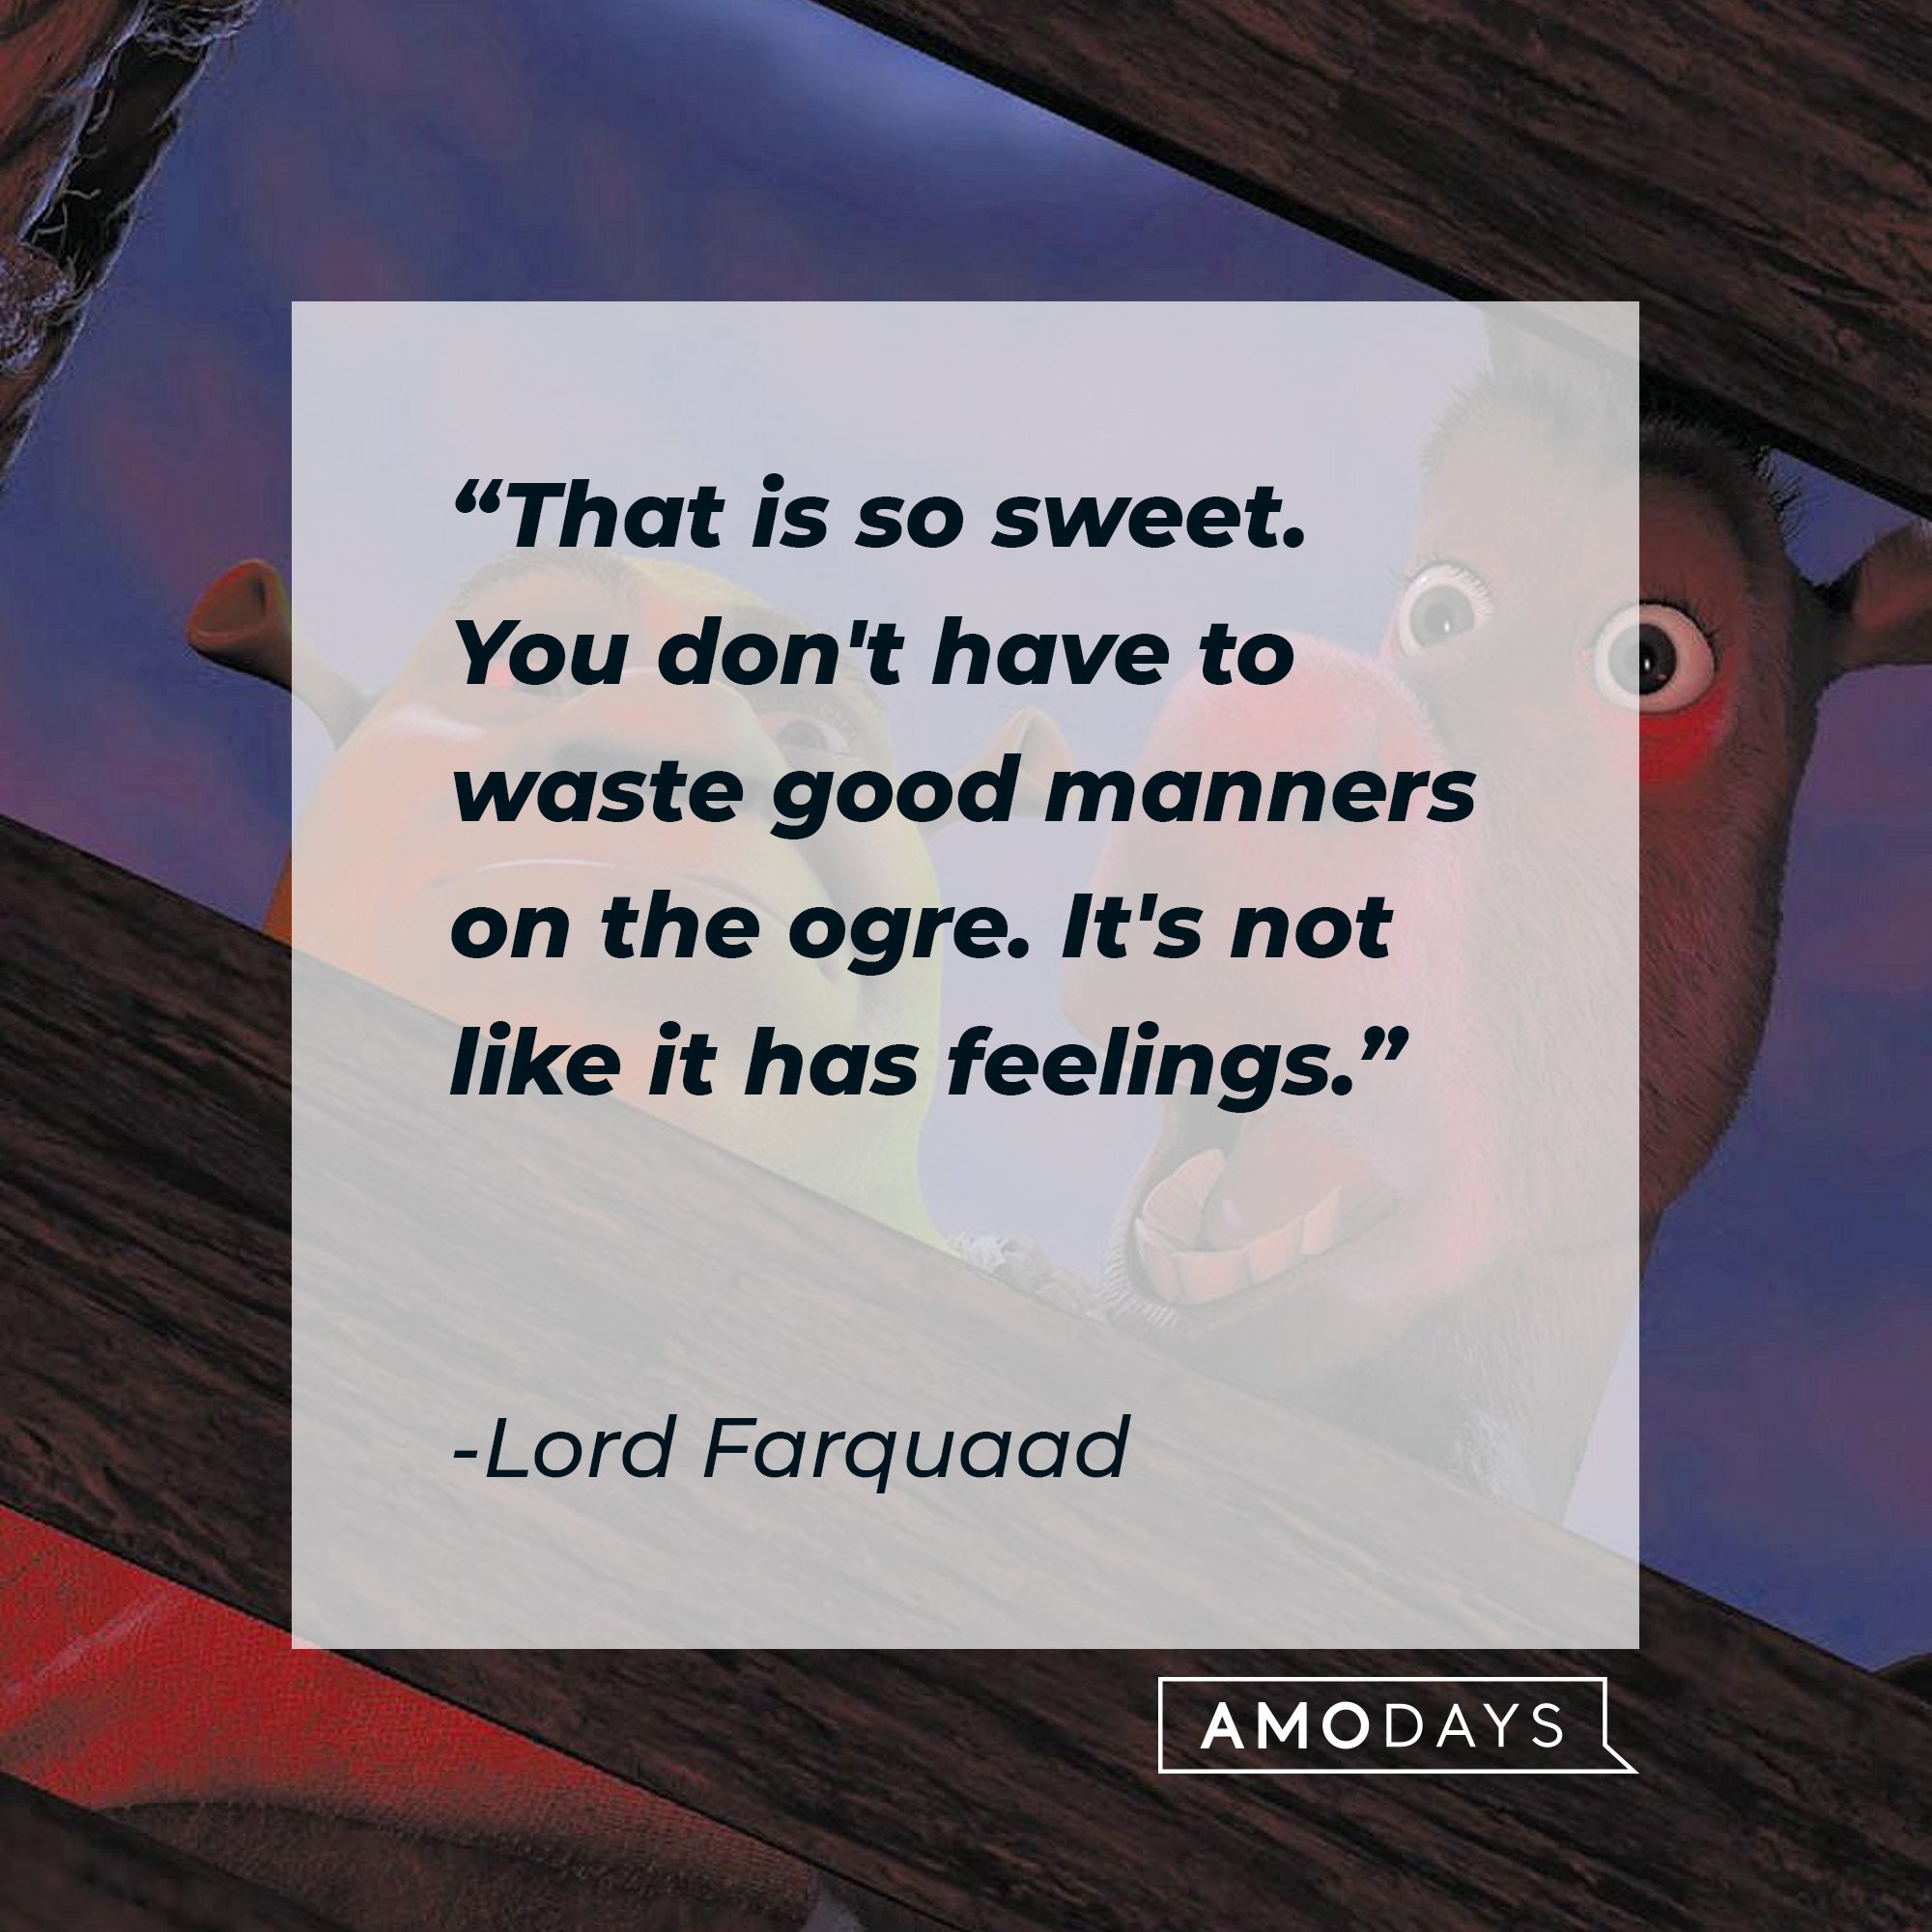 Lord Farquaad's quote: "That is so sweet. You don't have to waste good manners on the ogre. It's not like it has feelings." | Image: AmoDays 